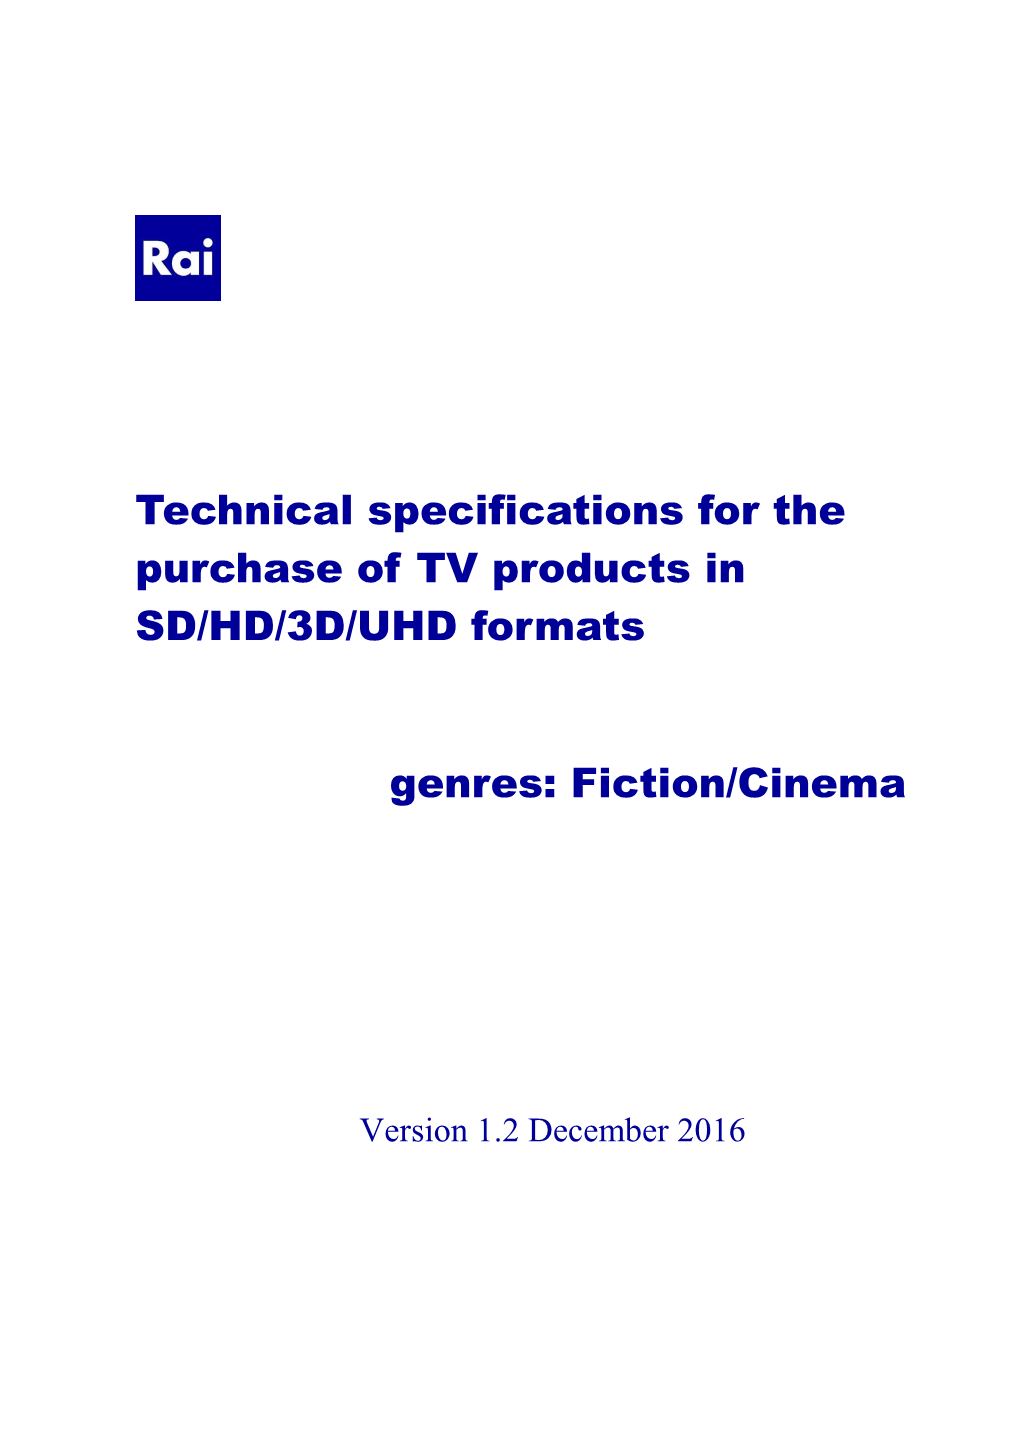 Technical Specifications for the Purchase of TV Products in SD/HD/3D/UHD Formats